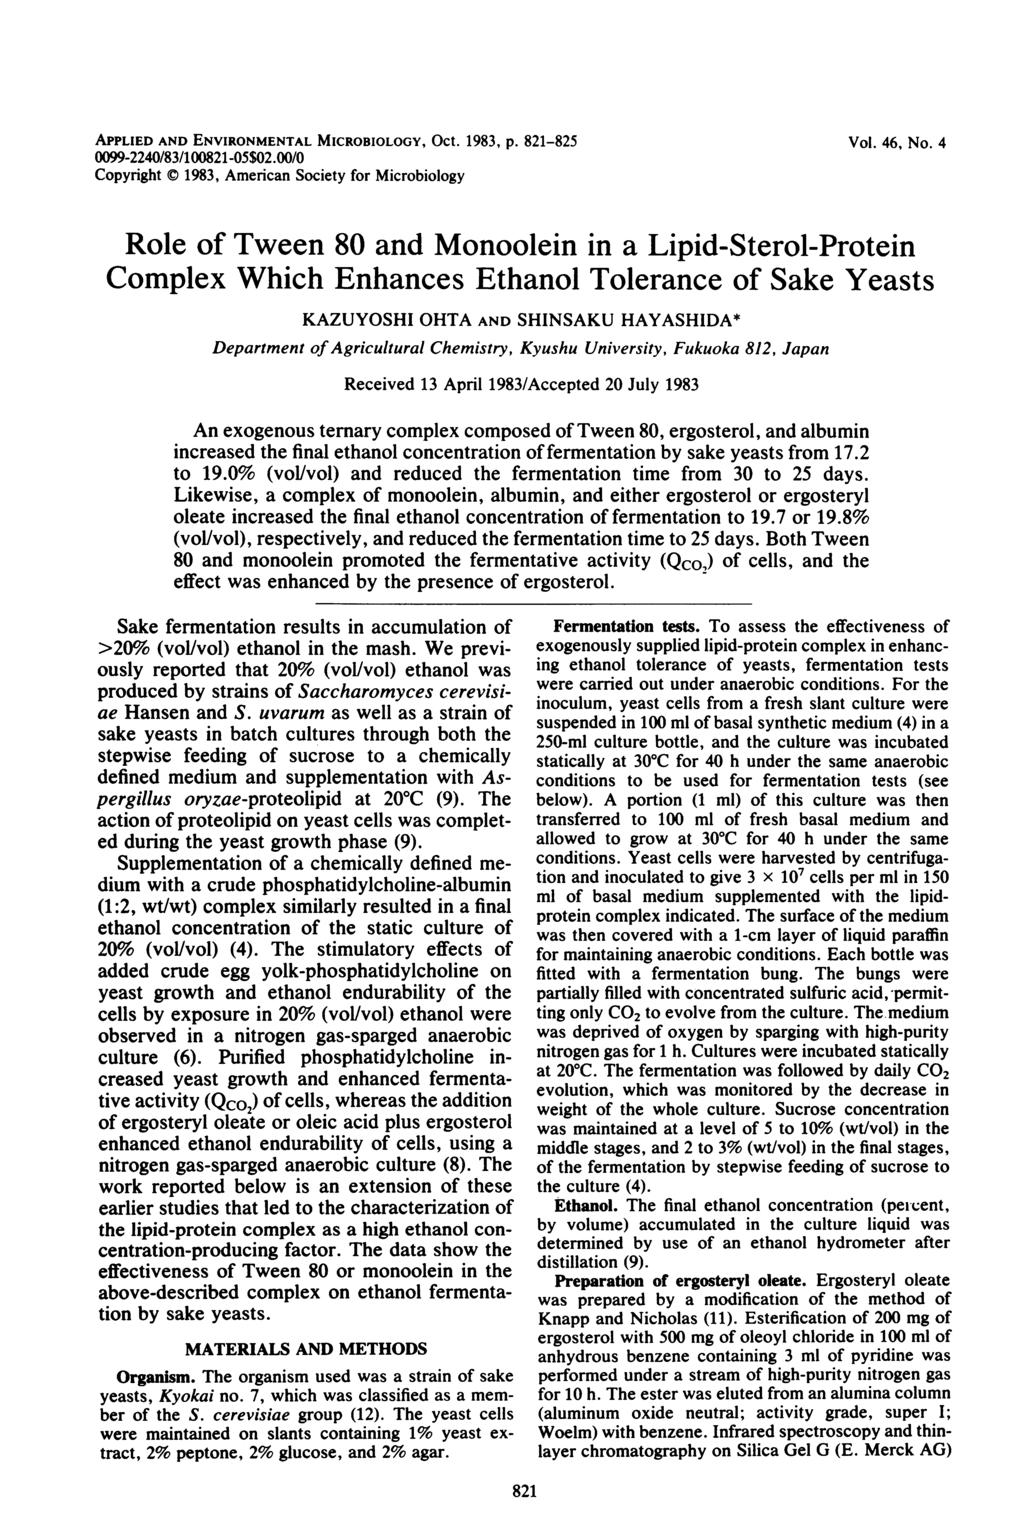 APPLIED AND ENVIRONMENTAL MICROBIOLOGY, OCt. 1983, p. 821-8 99-224/83/1821-5$2./ Copyright 1983, American Society for Microbiology Vol. 46, No.